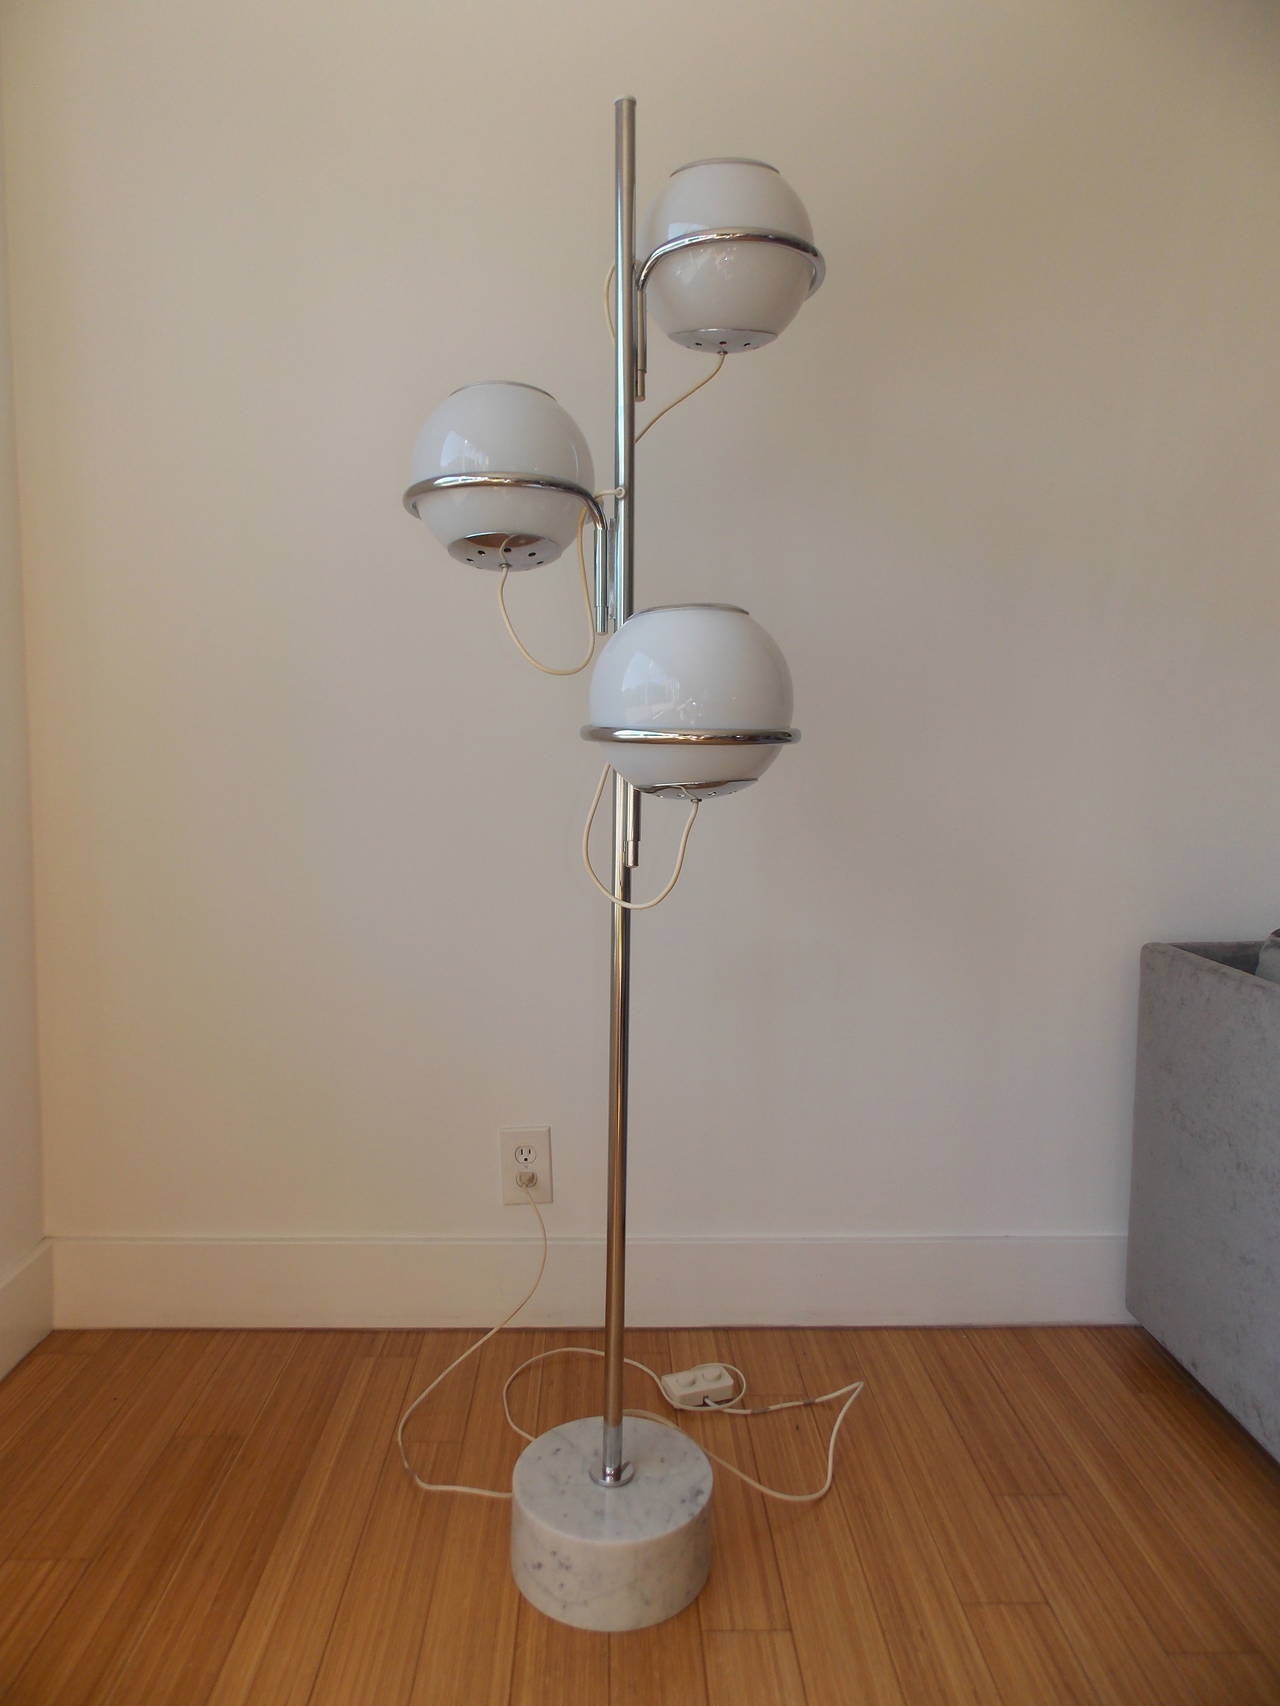 A fun design.
It's made of chrome-plated steel with three glass orb shades and heavy marble base.
It's in the original condition with original wiring.
It's sturdy and works great.